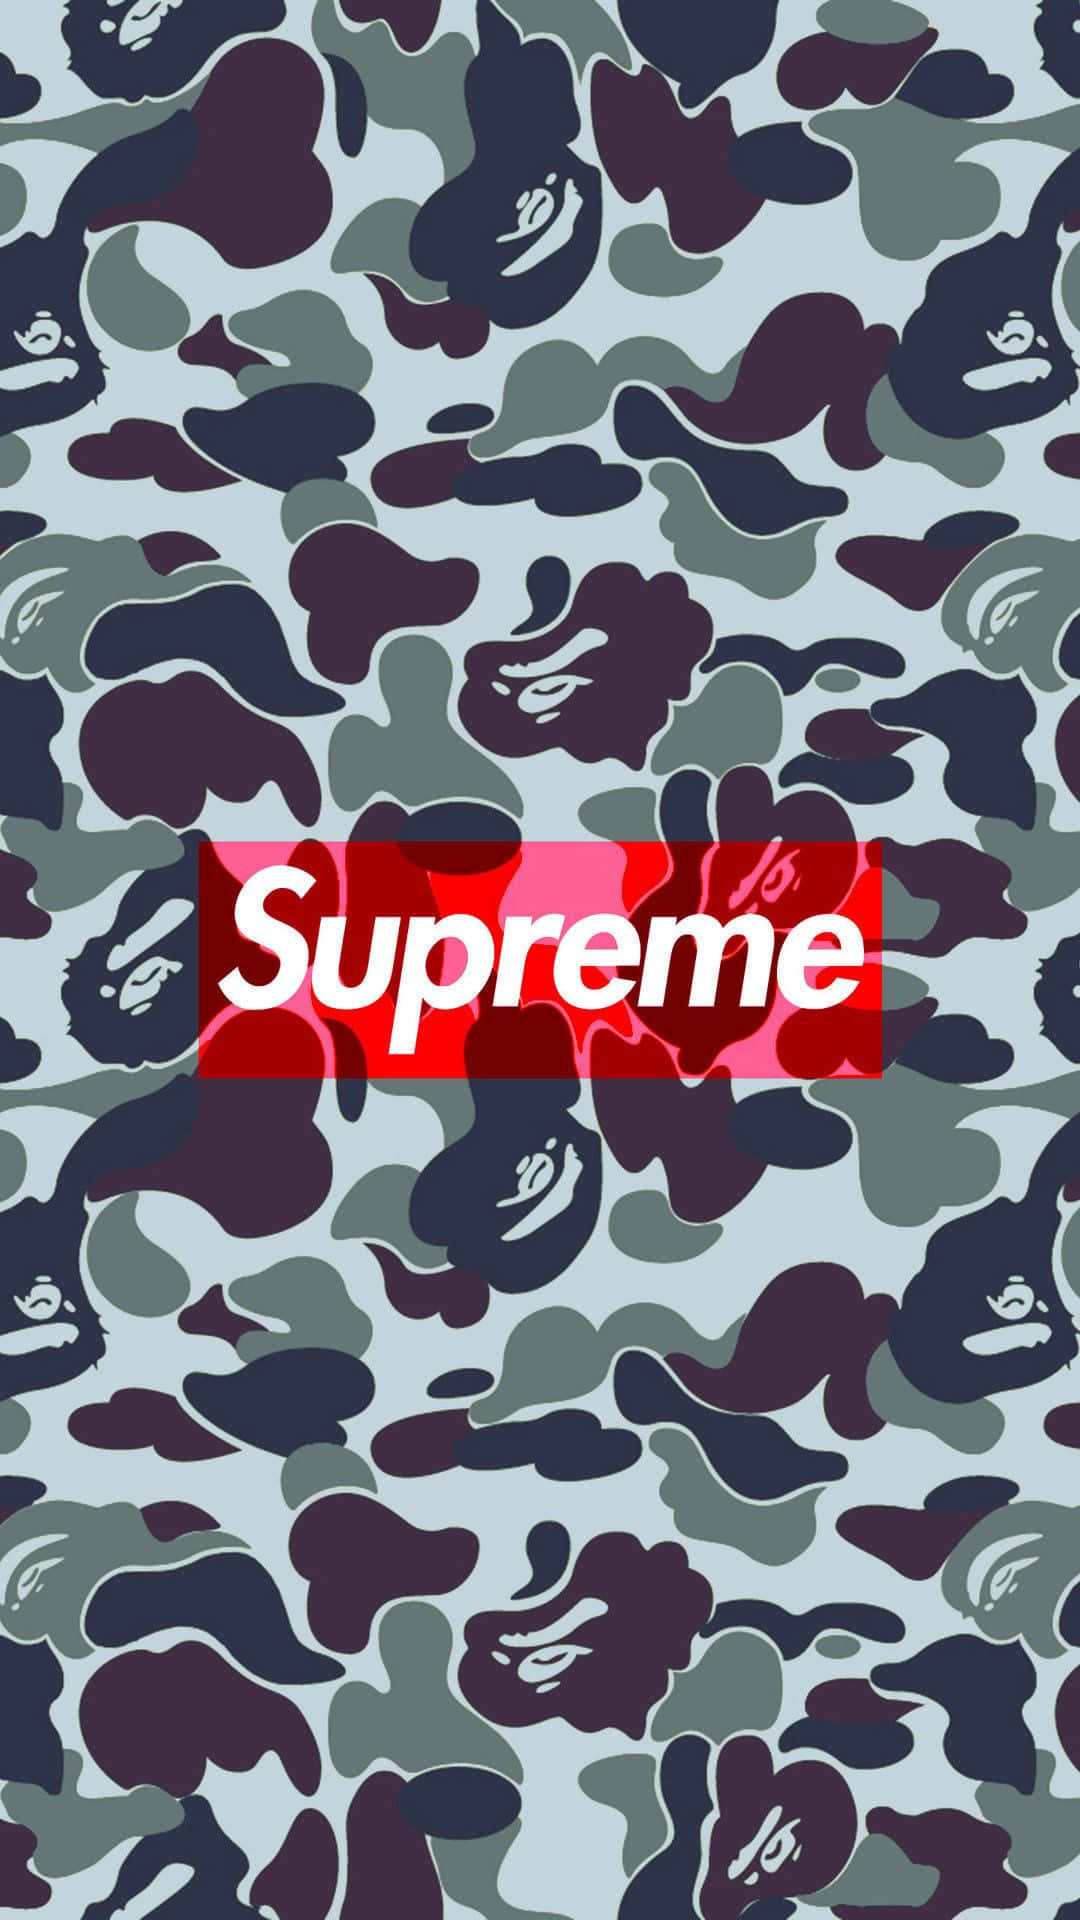 Keep your unique style with the Bape Iphone Wallpaper